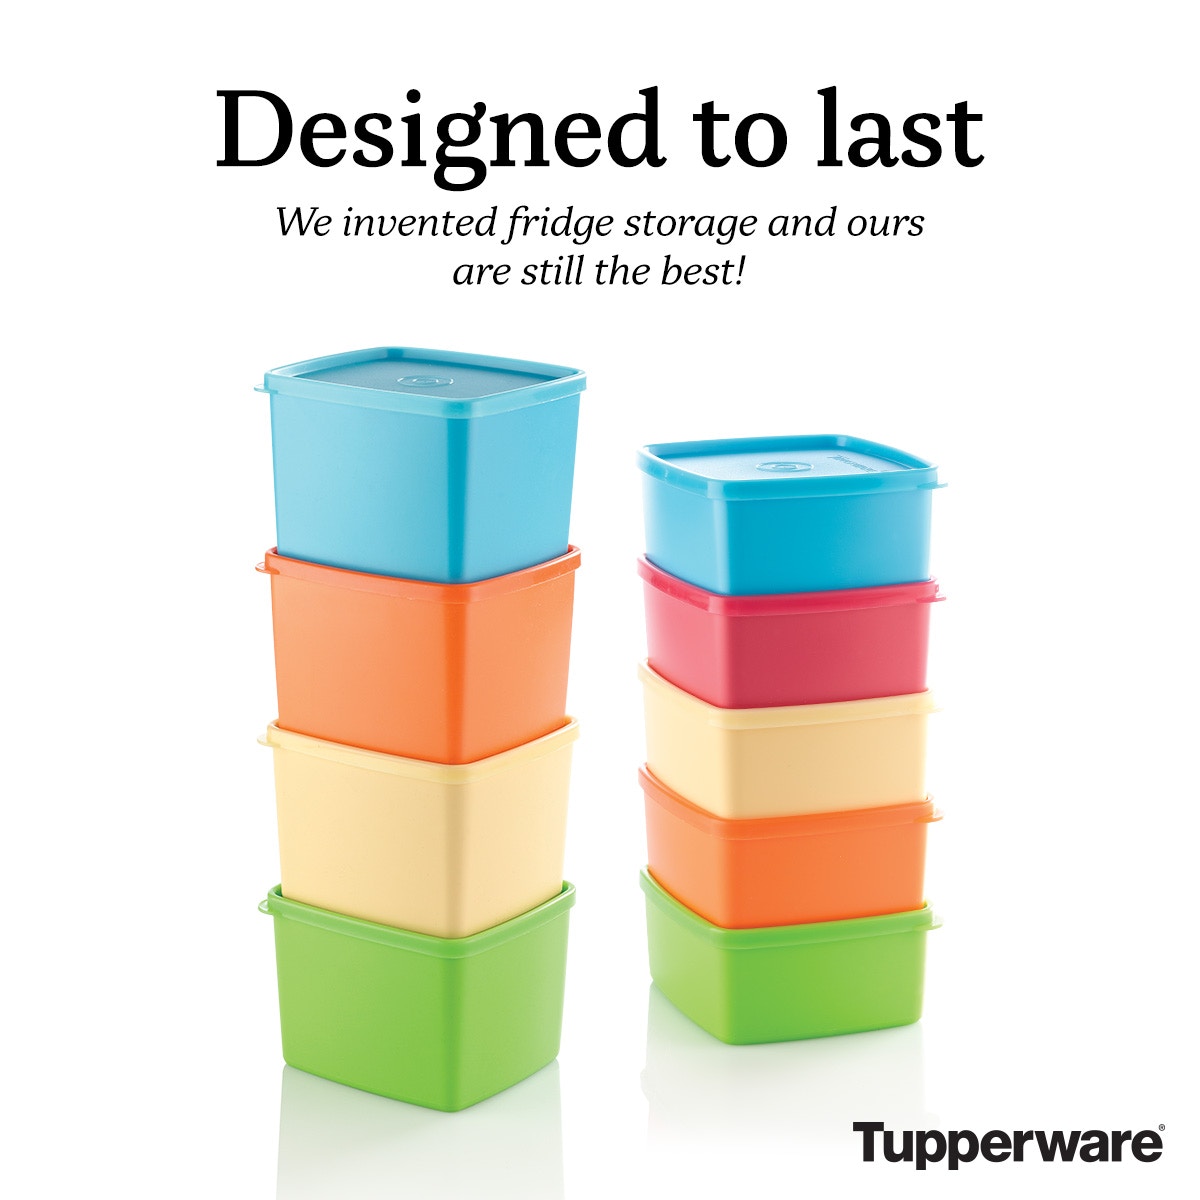 Designed to last - we've invented fridge storage and ours are still the best! 🍝🍜🍛

#Tupperware #TupperwareSA #TupperFan #TuppSocial #storage #fridgeStorage